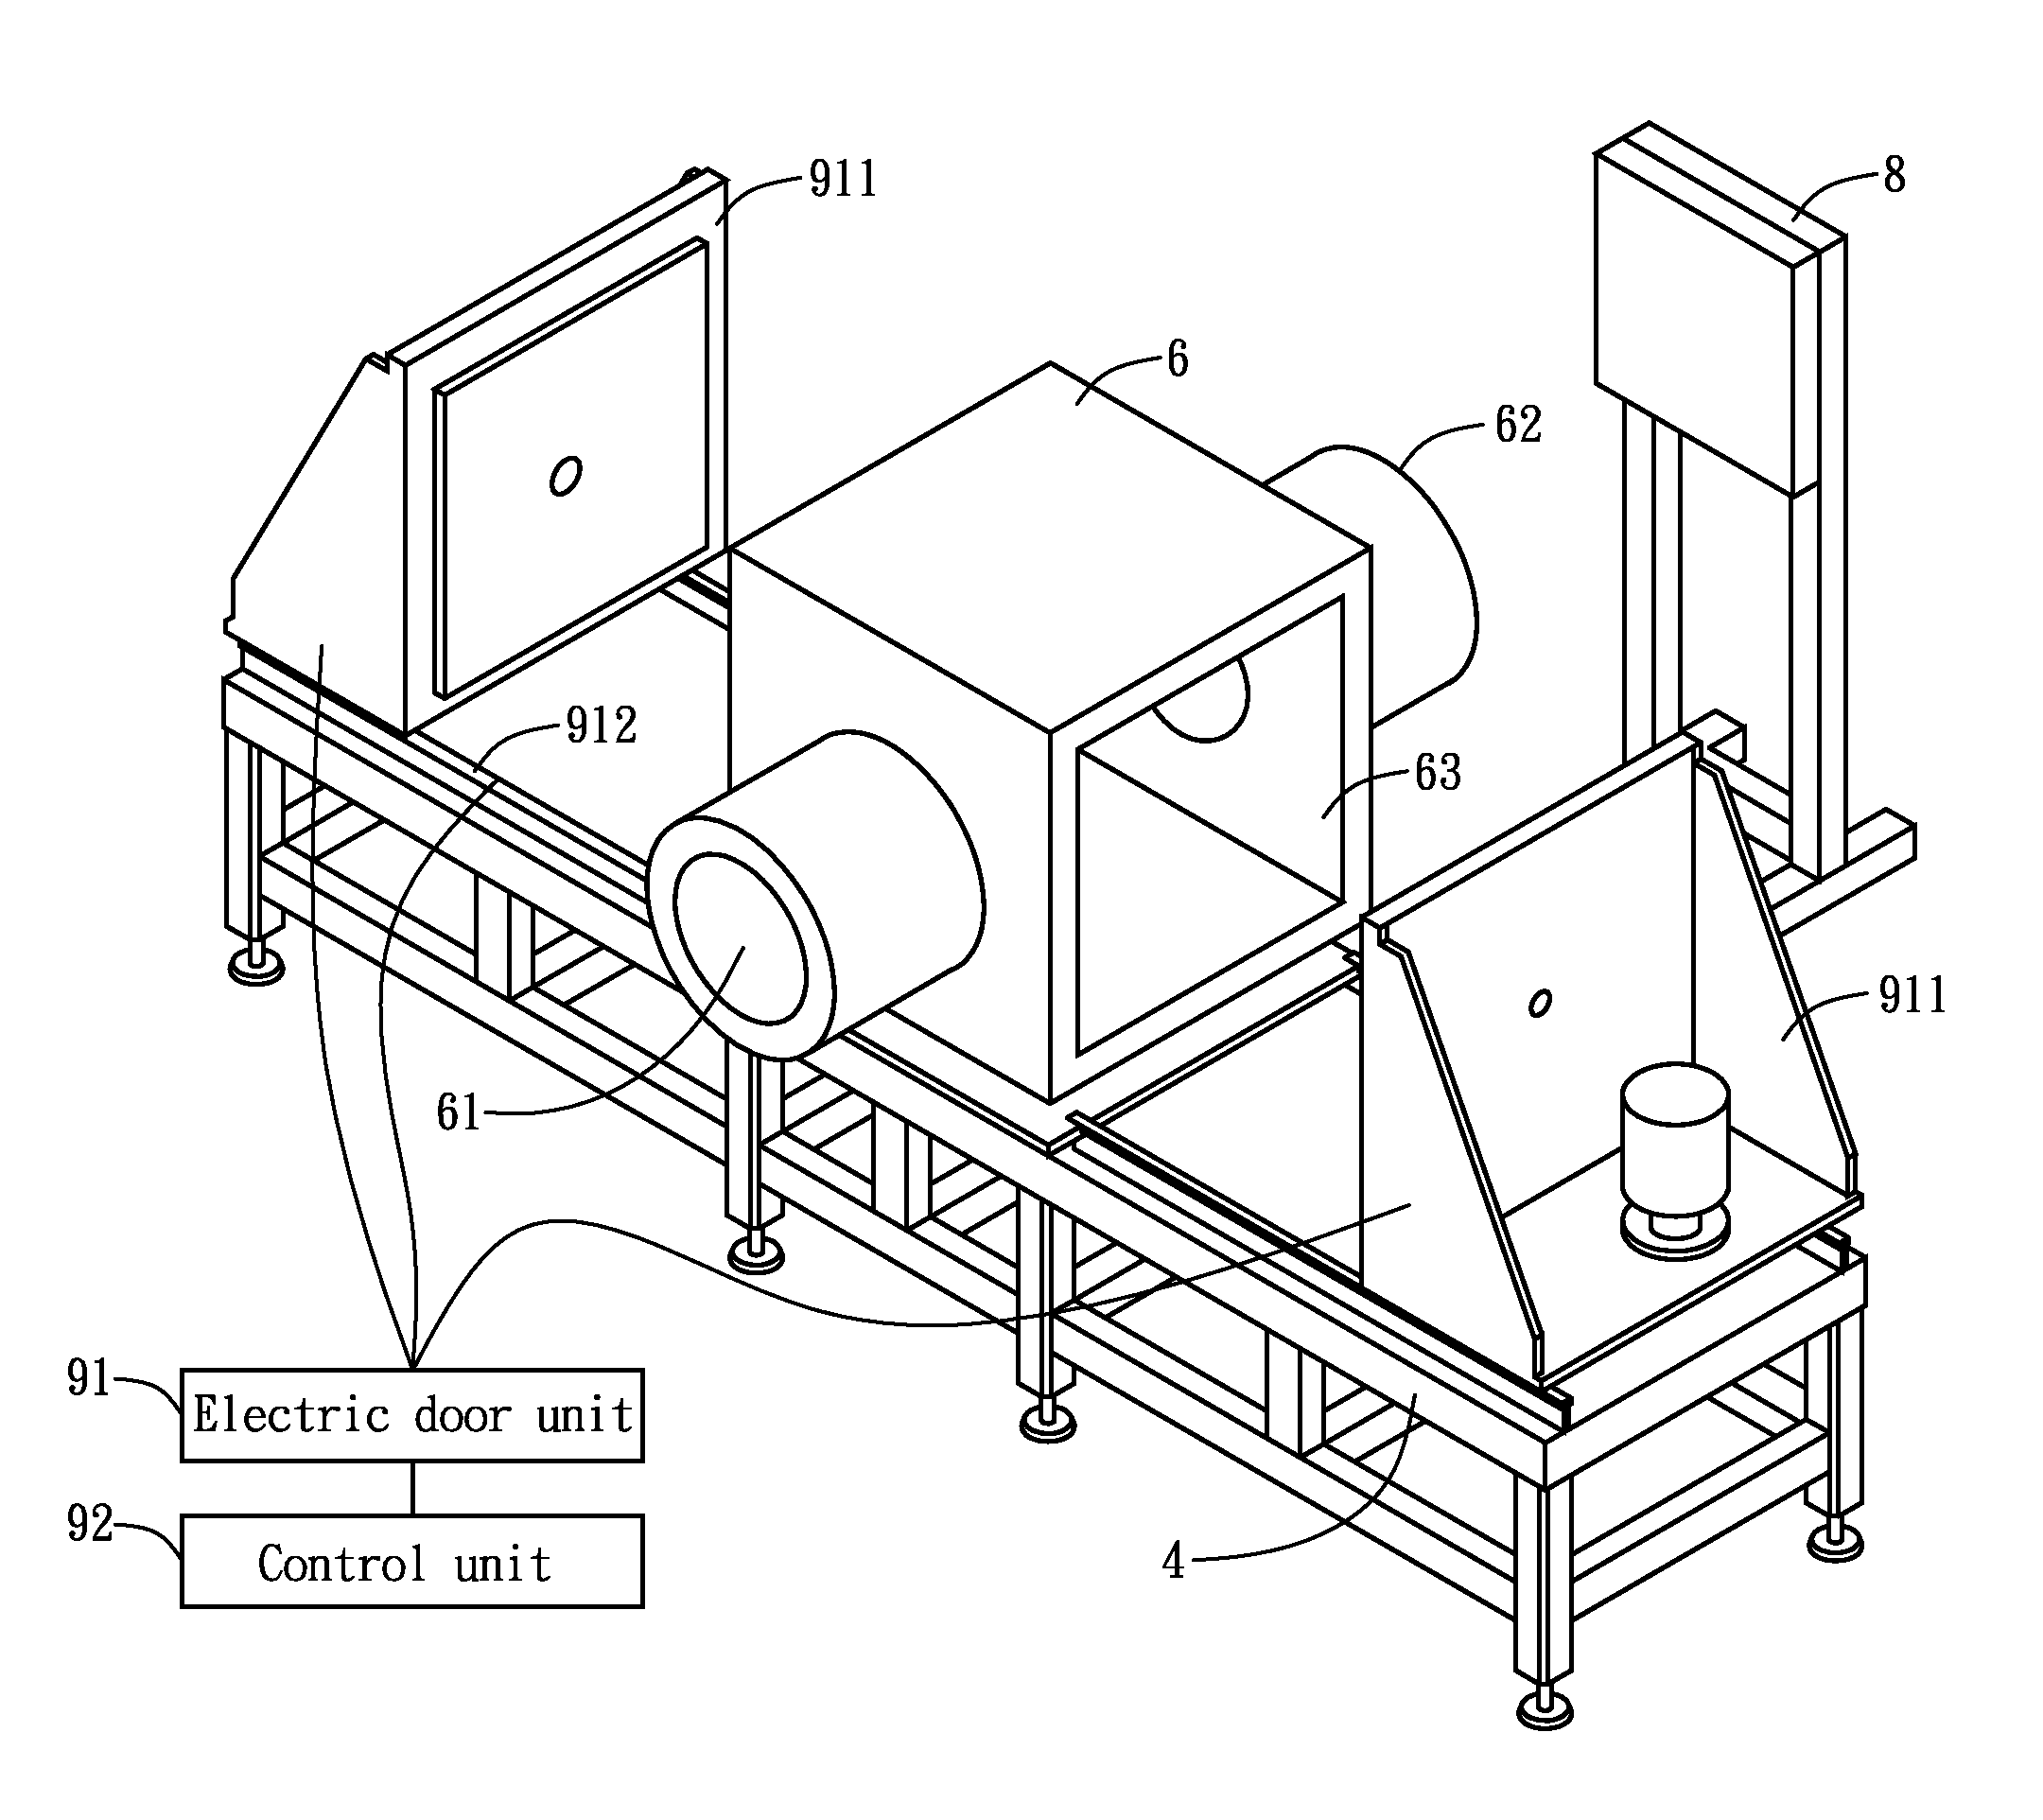 Radiation measurement instrument calibration facility capable of lowering scattered radiation and shielding background radiation